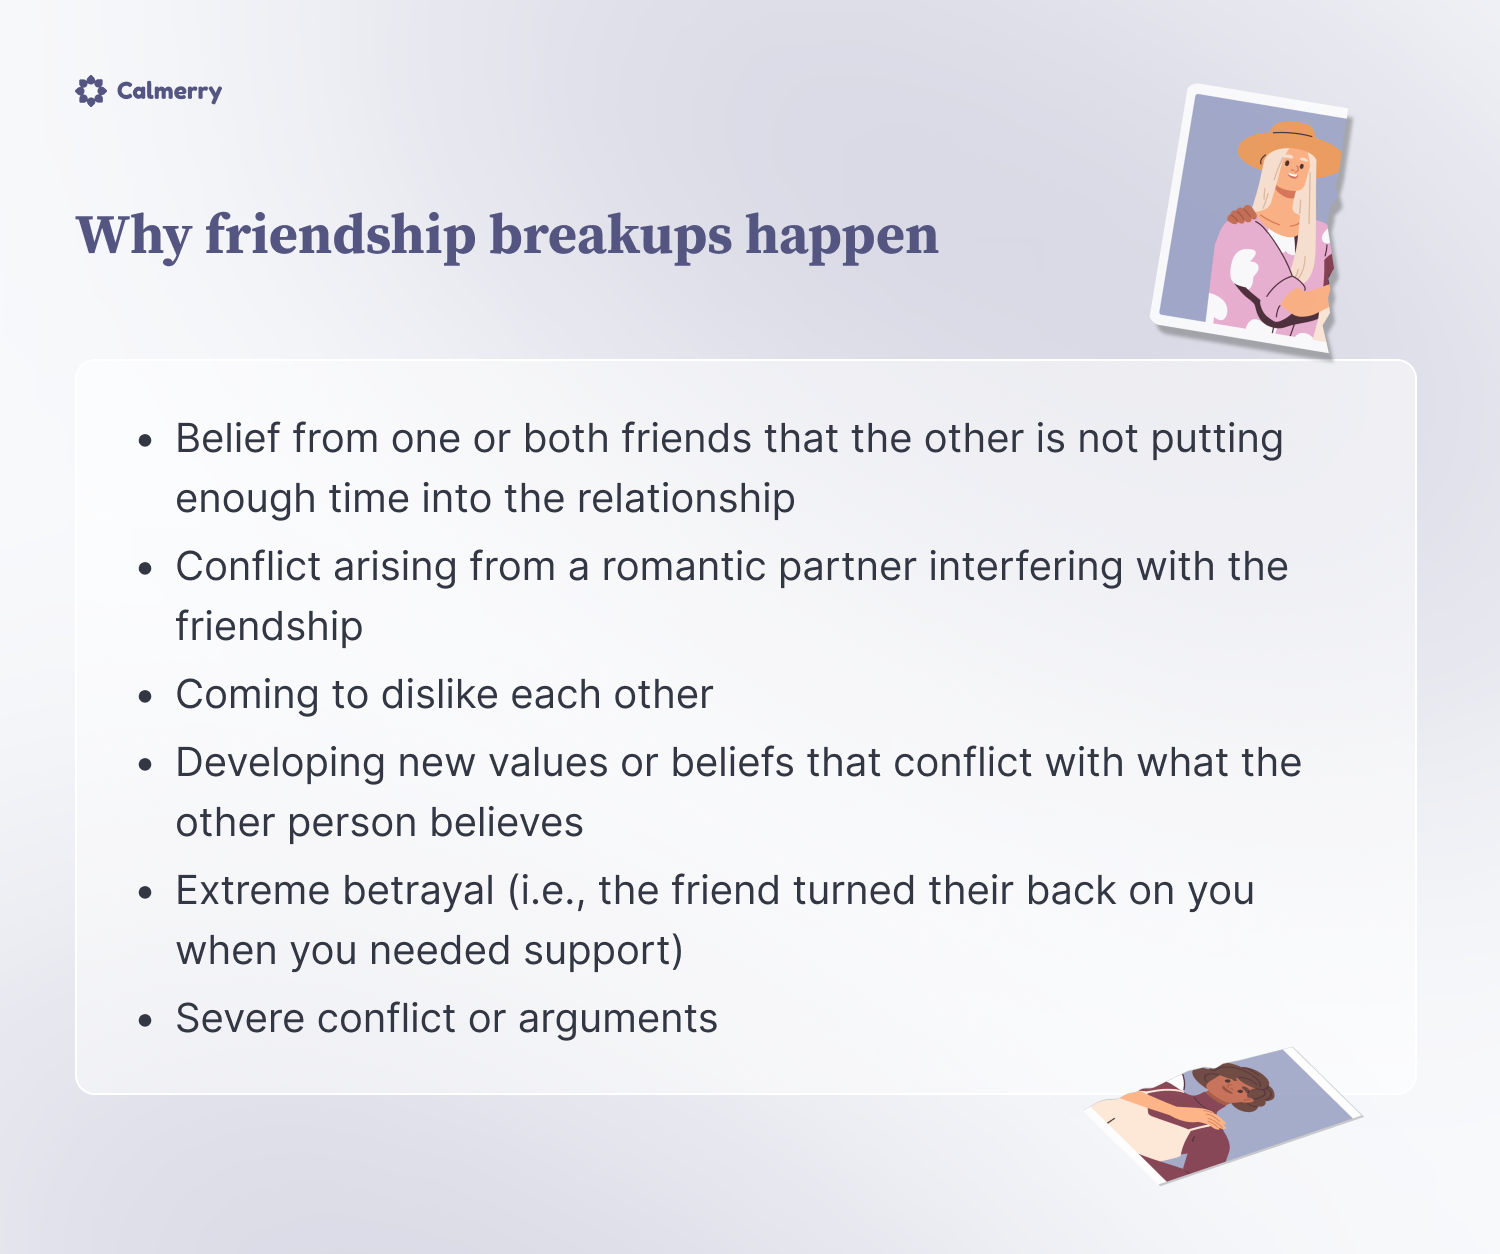 Why friendship breakups happen
Belief from one or both friends that the other is not putting enough time into the relationship
Conflict arising from a romantic partner interfering with the friendship
Coming to dislike each other
Developing new values or beliefs that conflict with what the other person believes
Extreme betrayal (i.e., the friend turned their back on you when you needed support)
Severe conflict or arguments